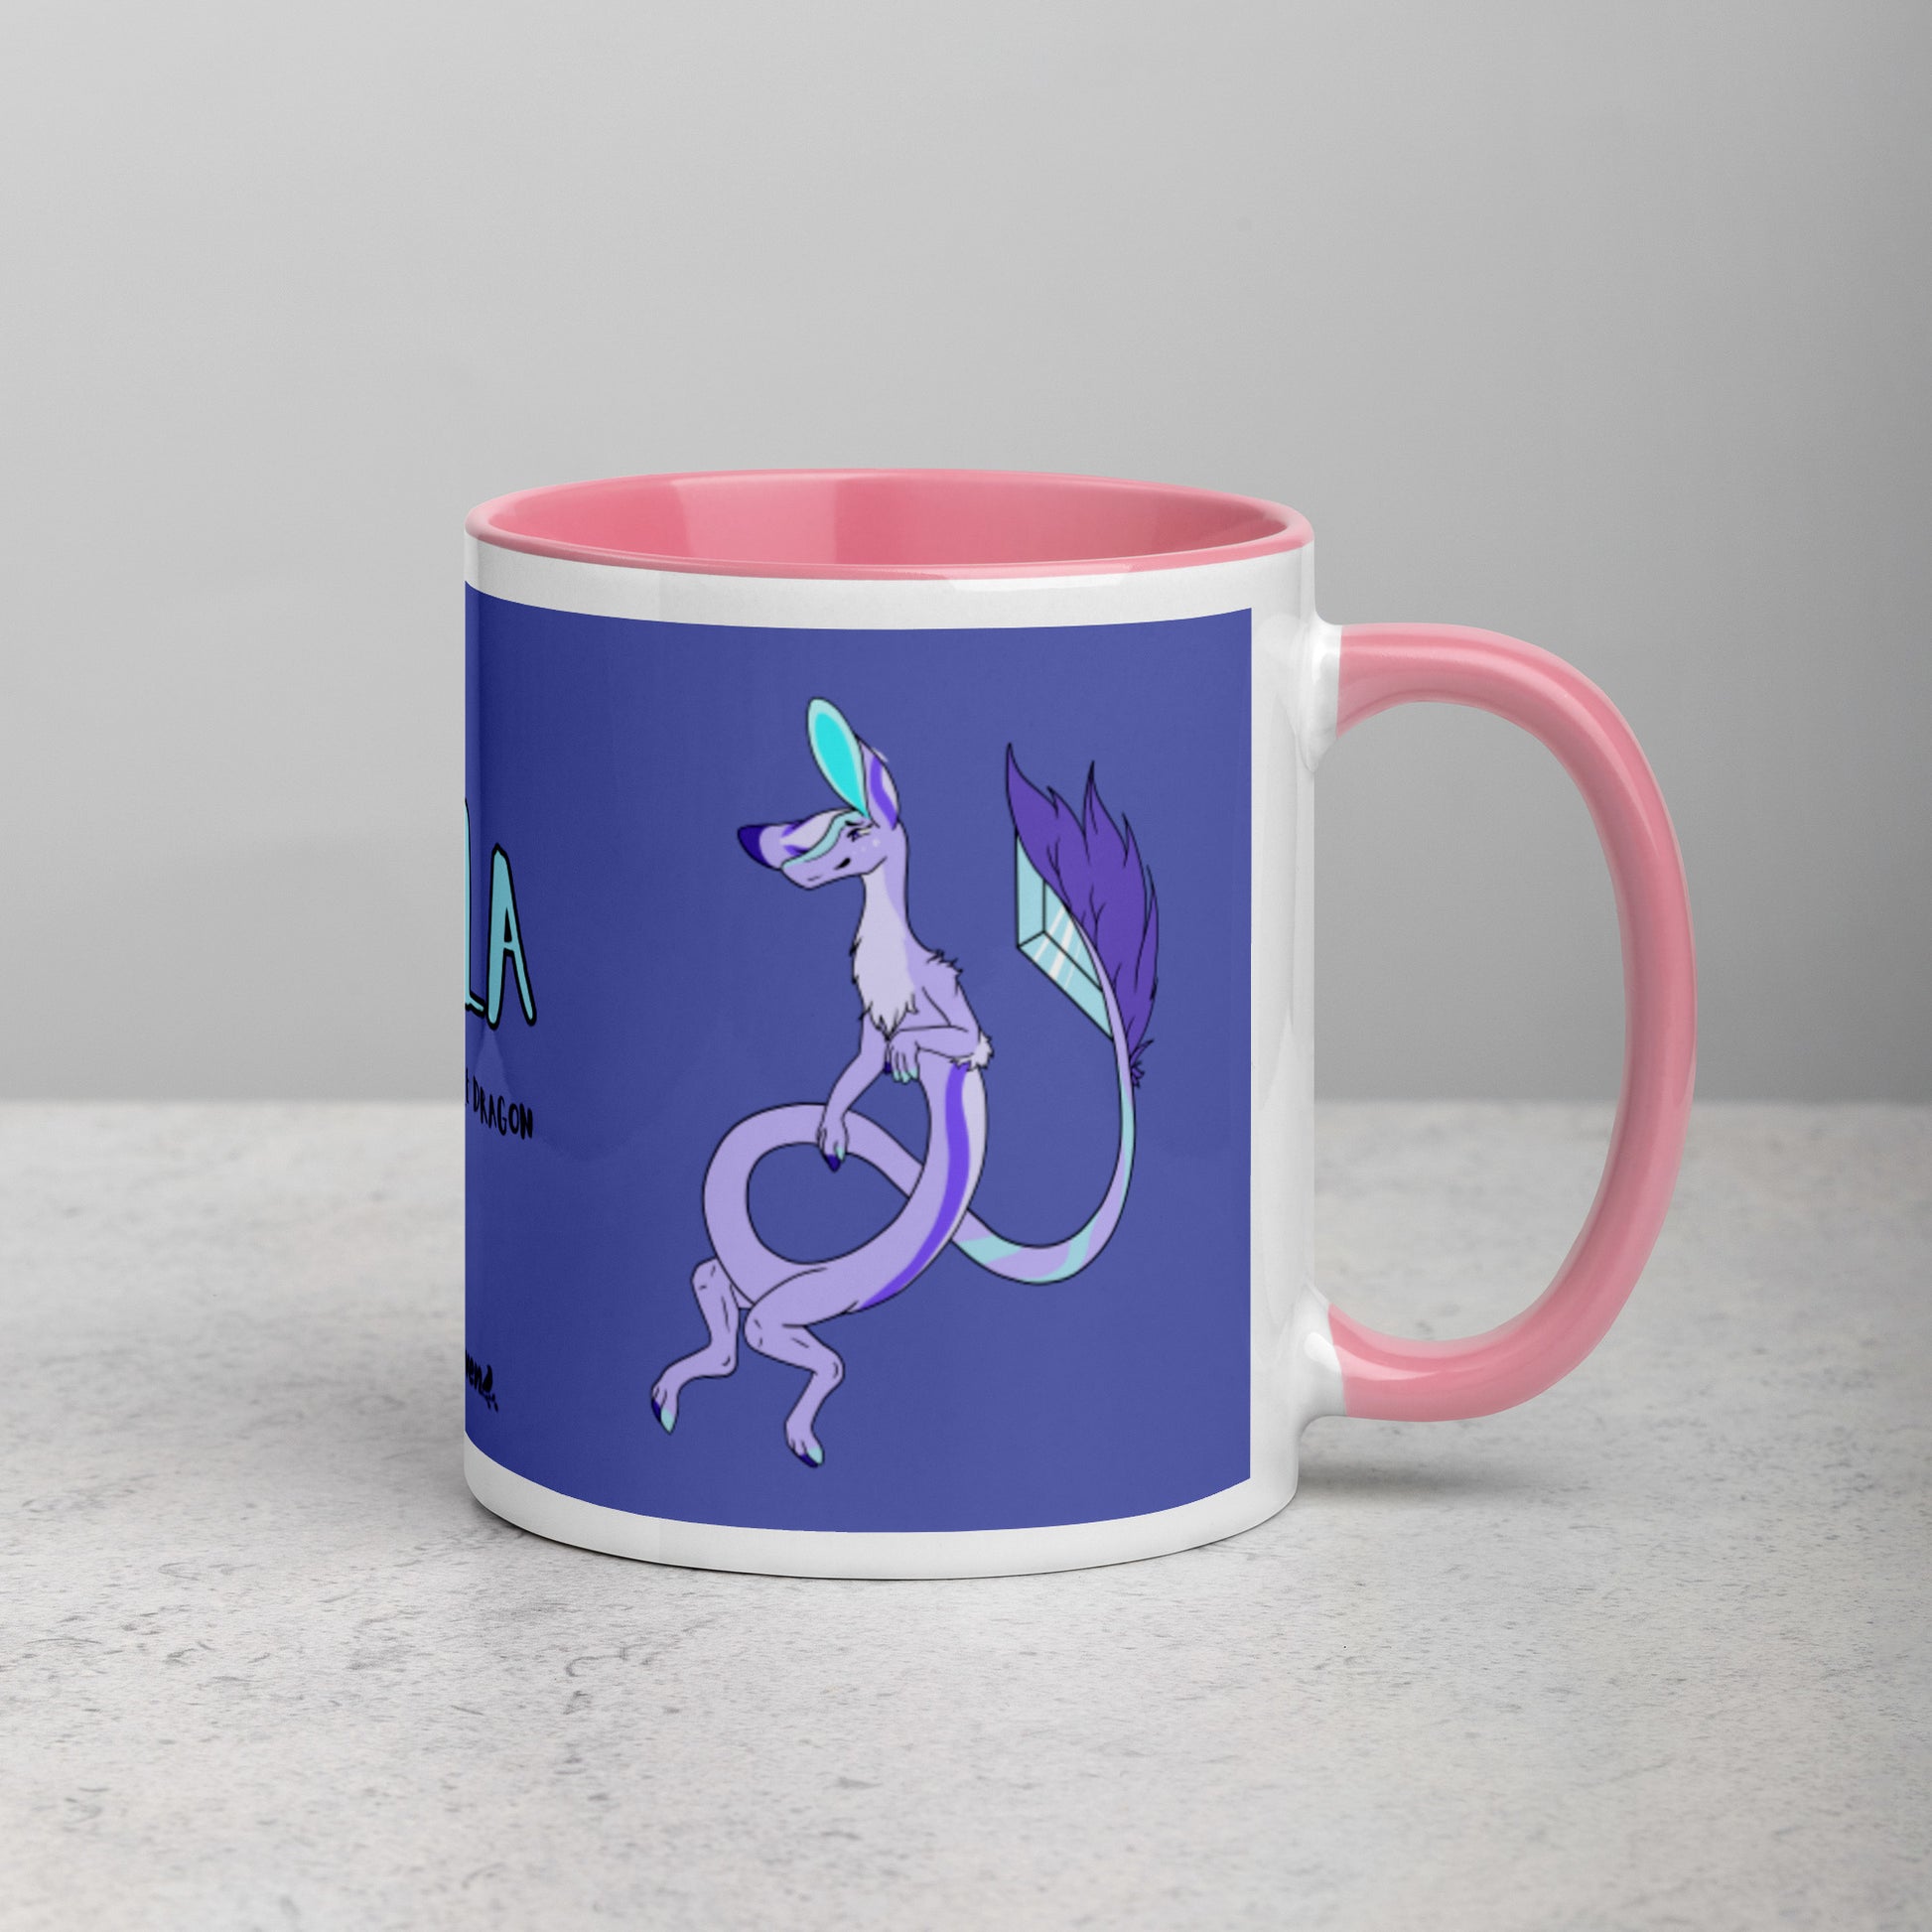 11 ounce white ceramic mug. Pink inside and handle. Features double-sided image of Layla the Lavender Fuzzy Noodle Dragon. Shown on tabletop with handle facing right.